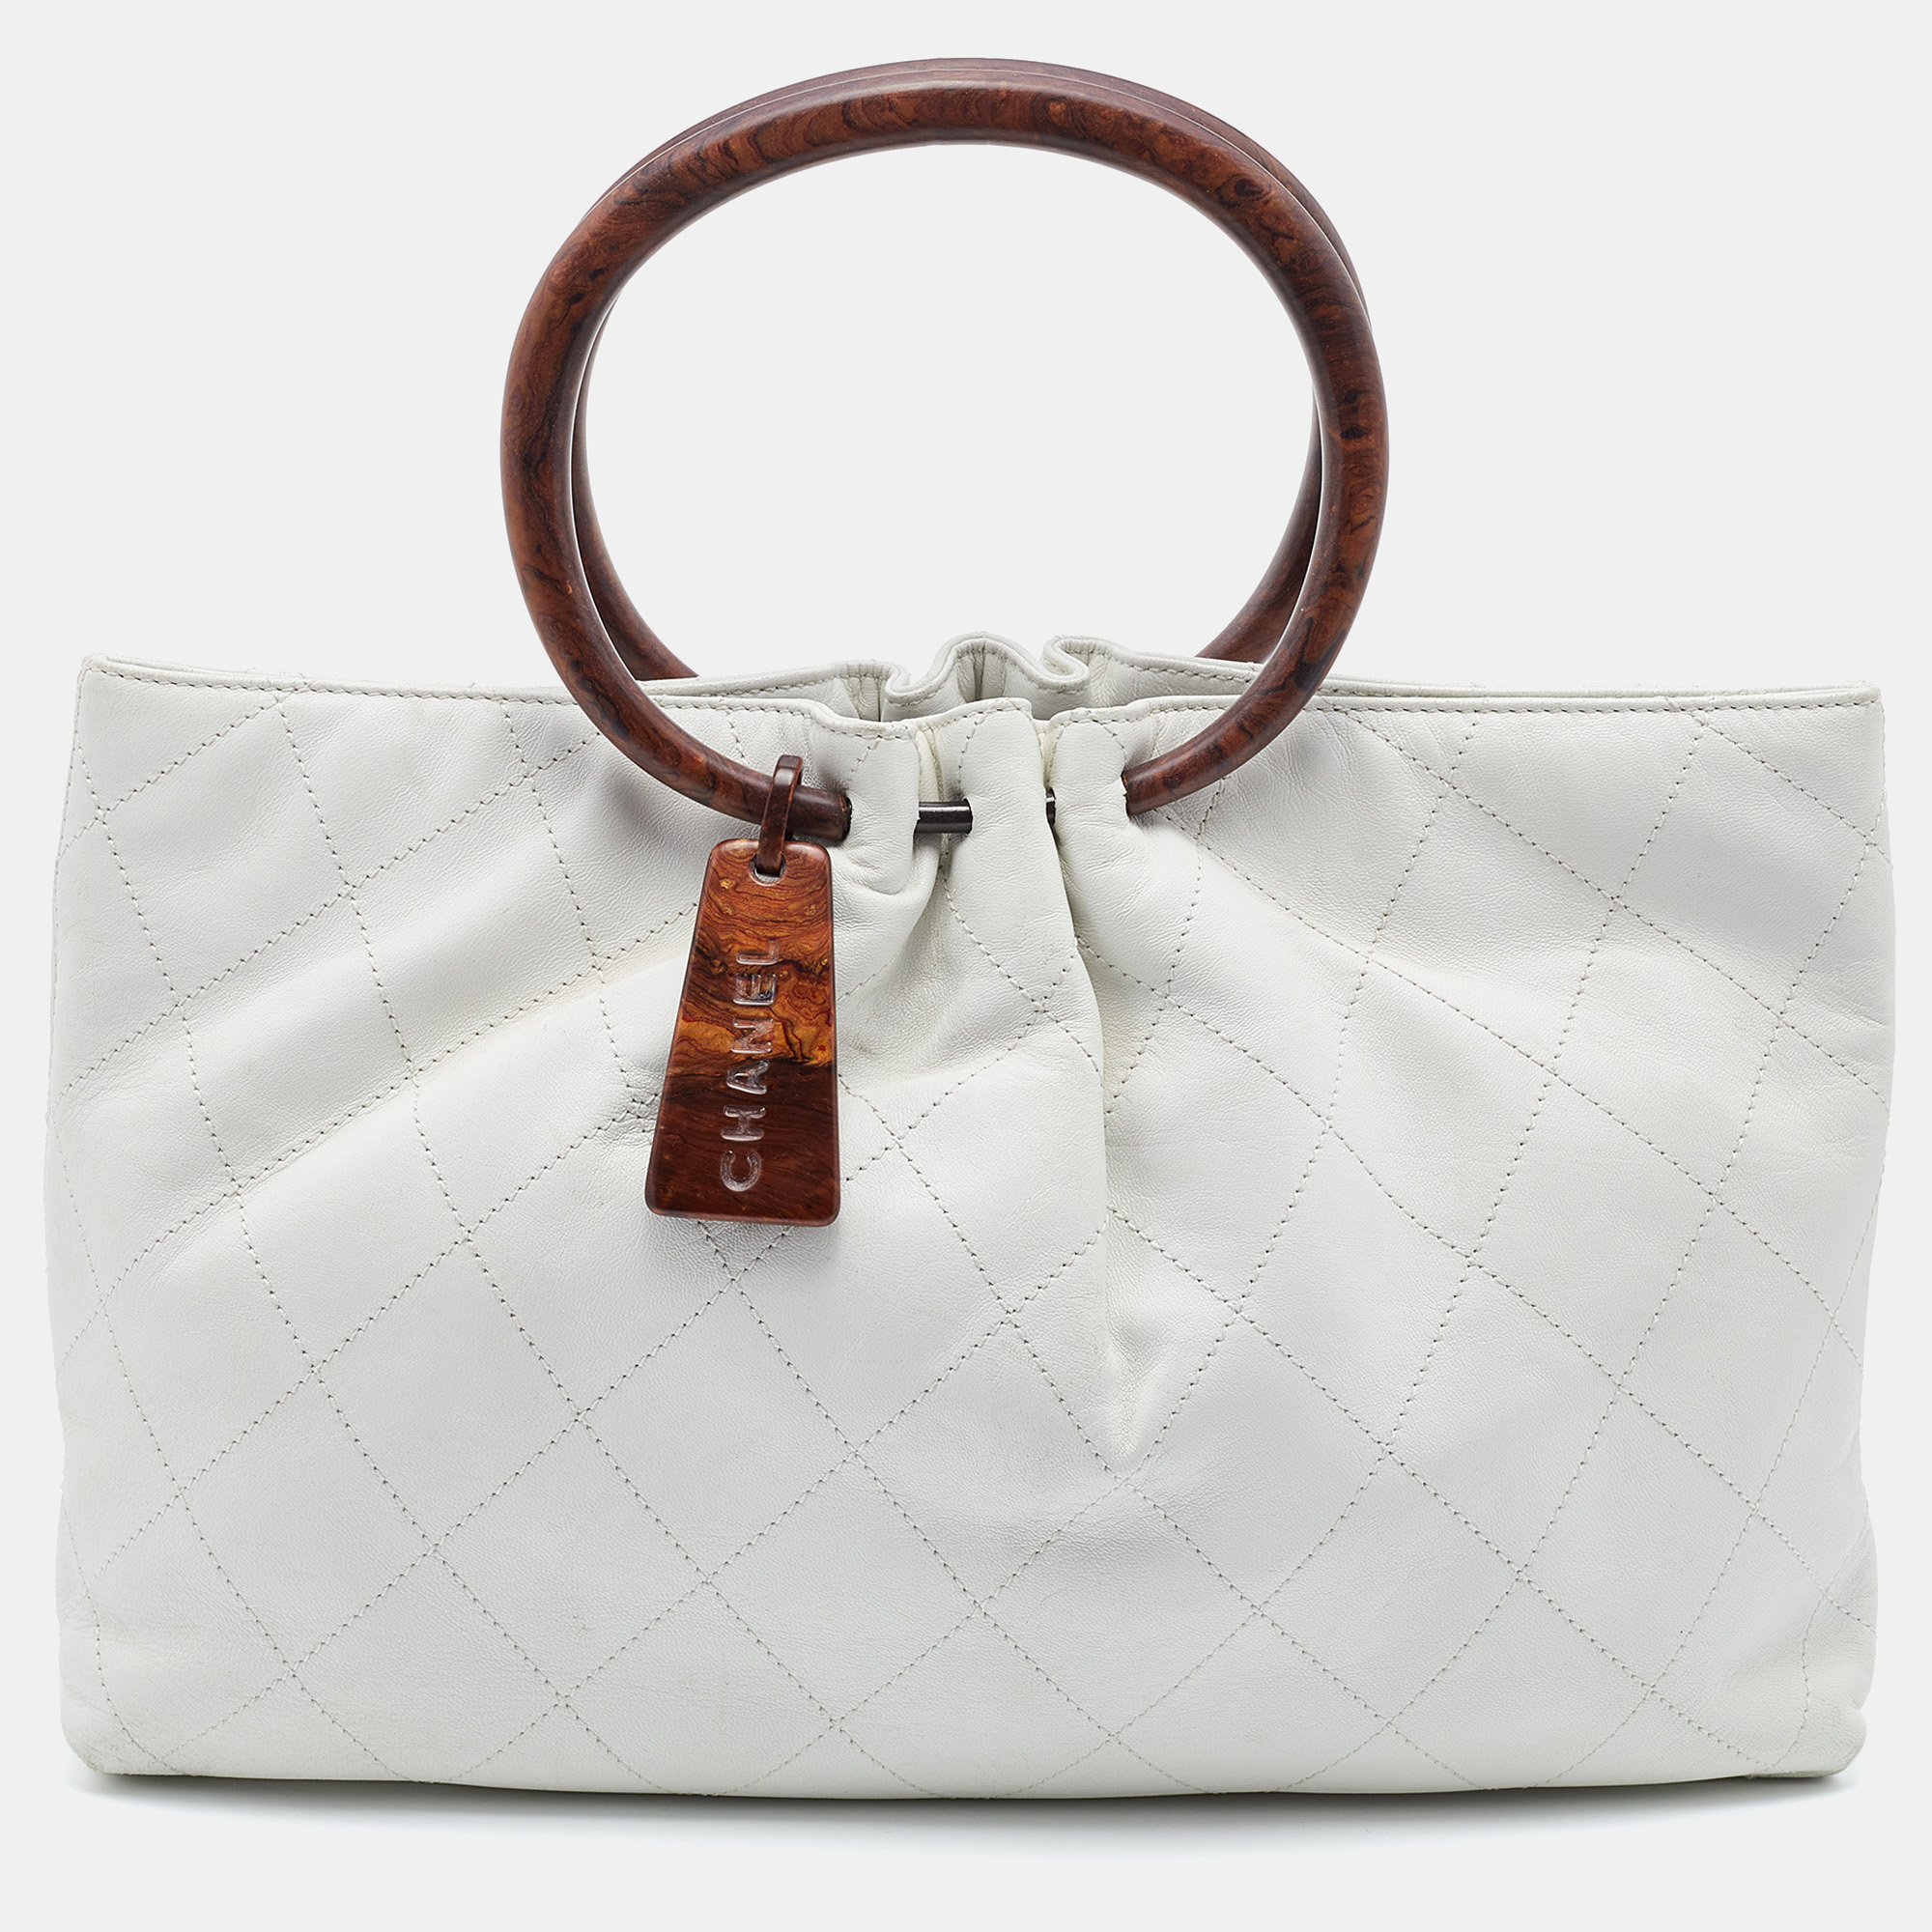 CHANEL Tote Quilted Bags & Handbags for Women, Authenticity Guaranteed